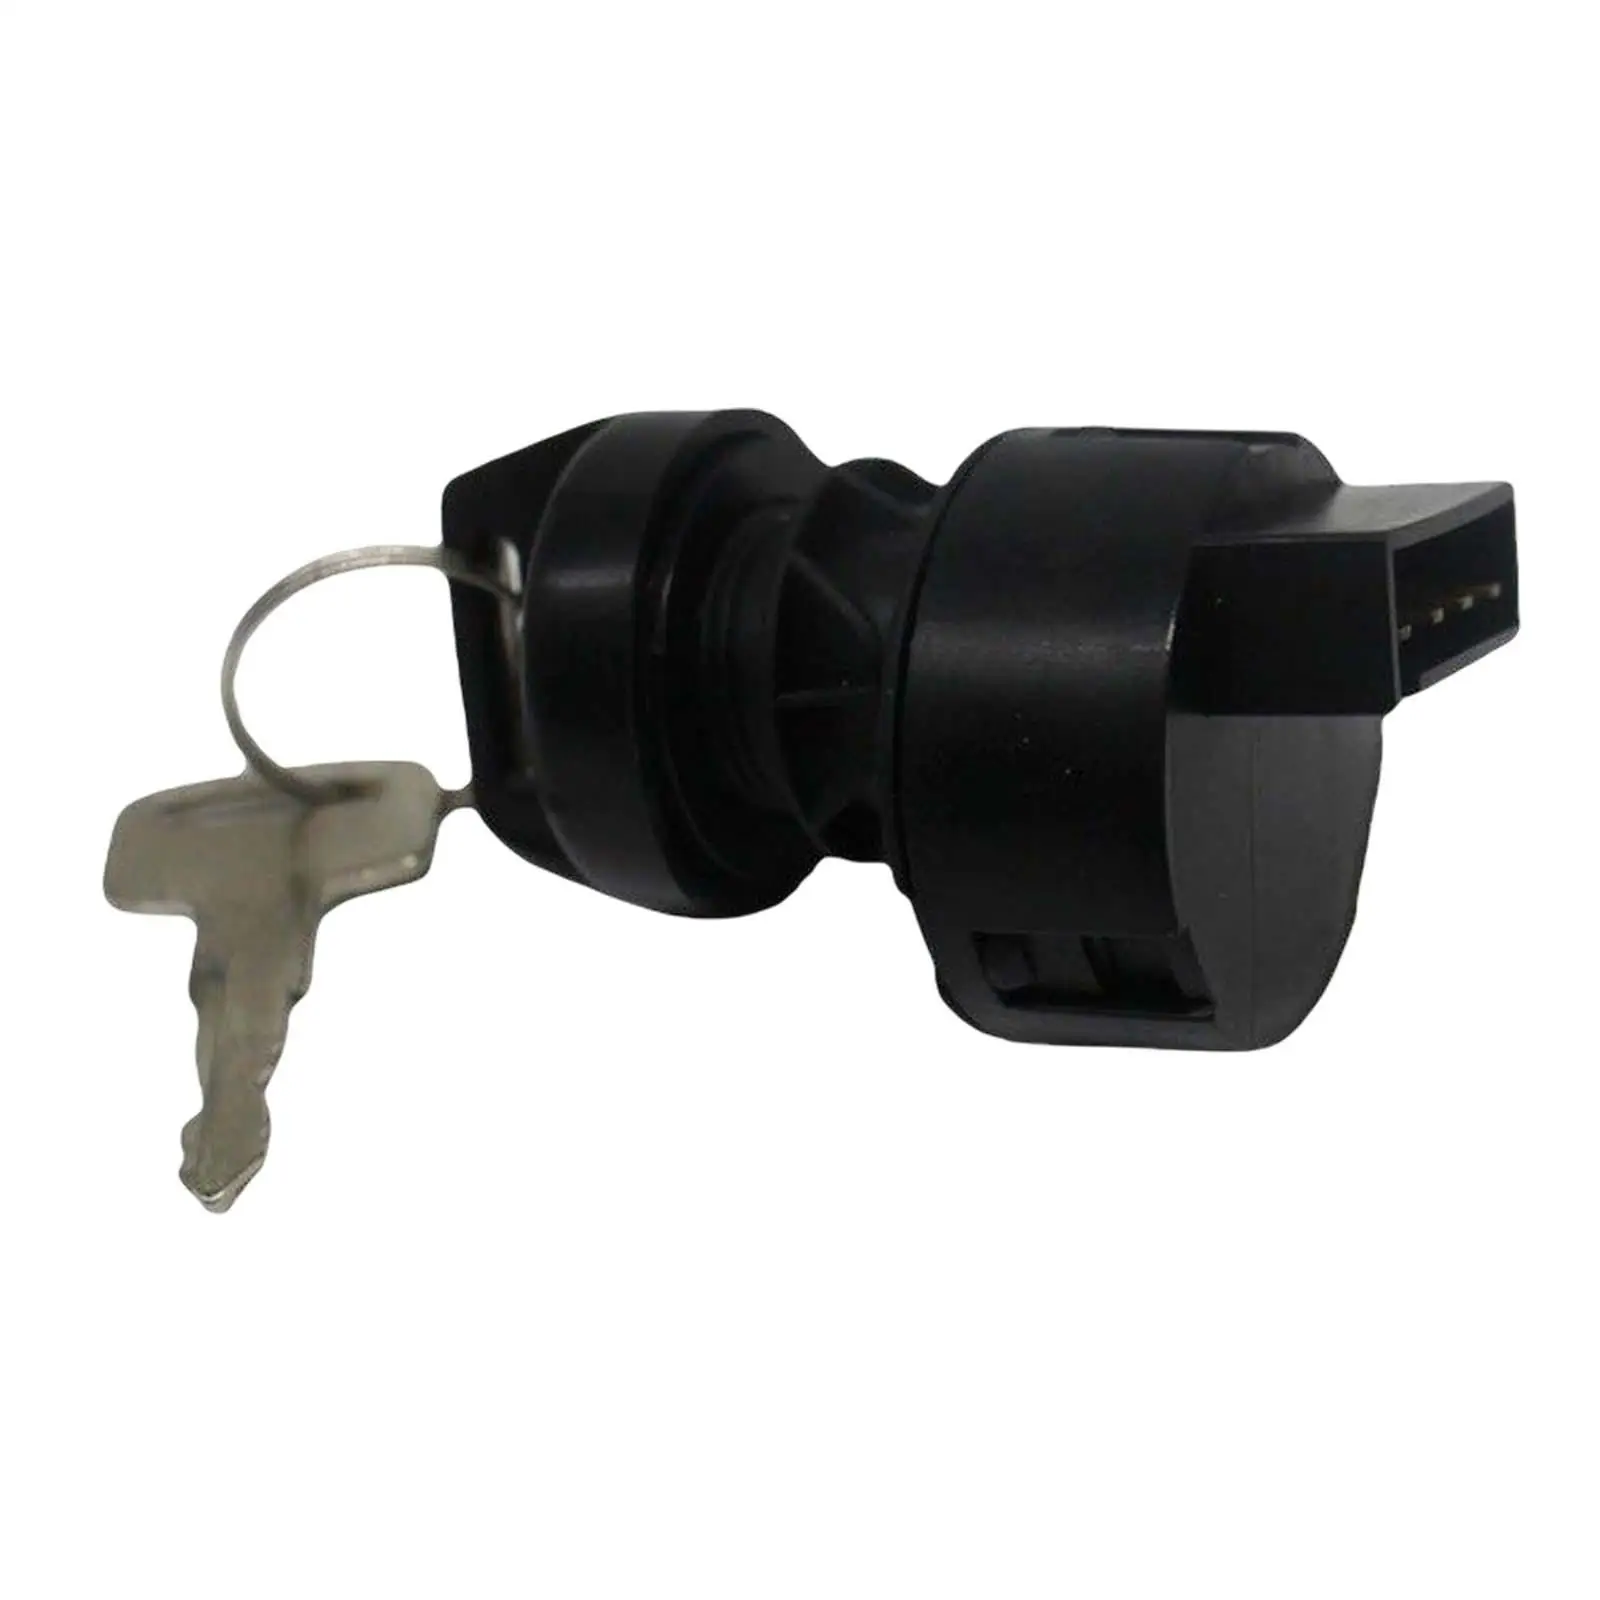 Ignition Switch Lock Durable Professional for Polaris Sportsman 335 400 500 600